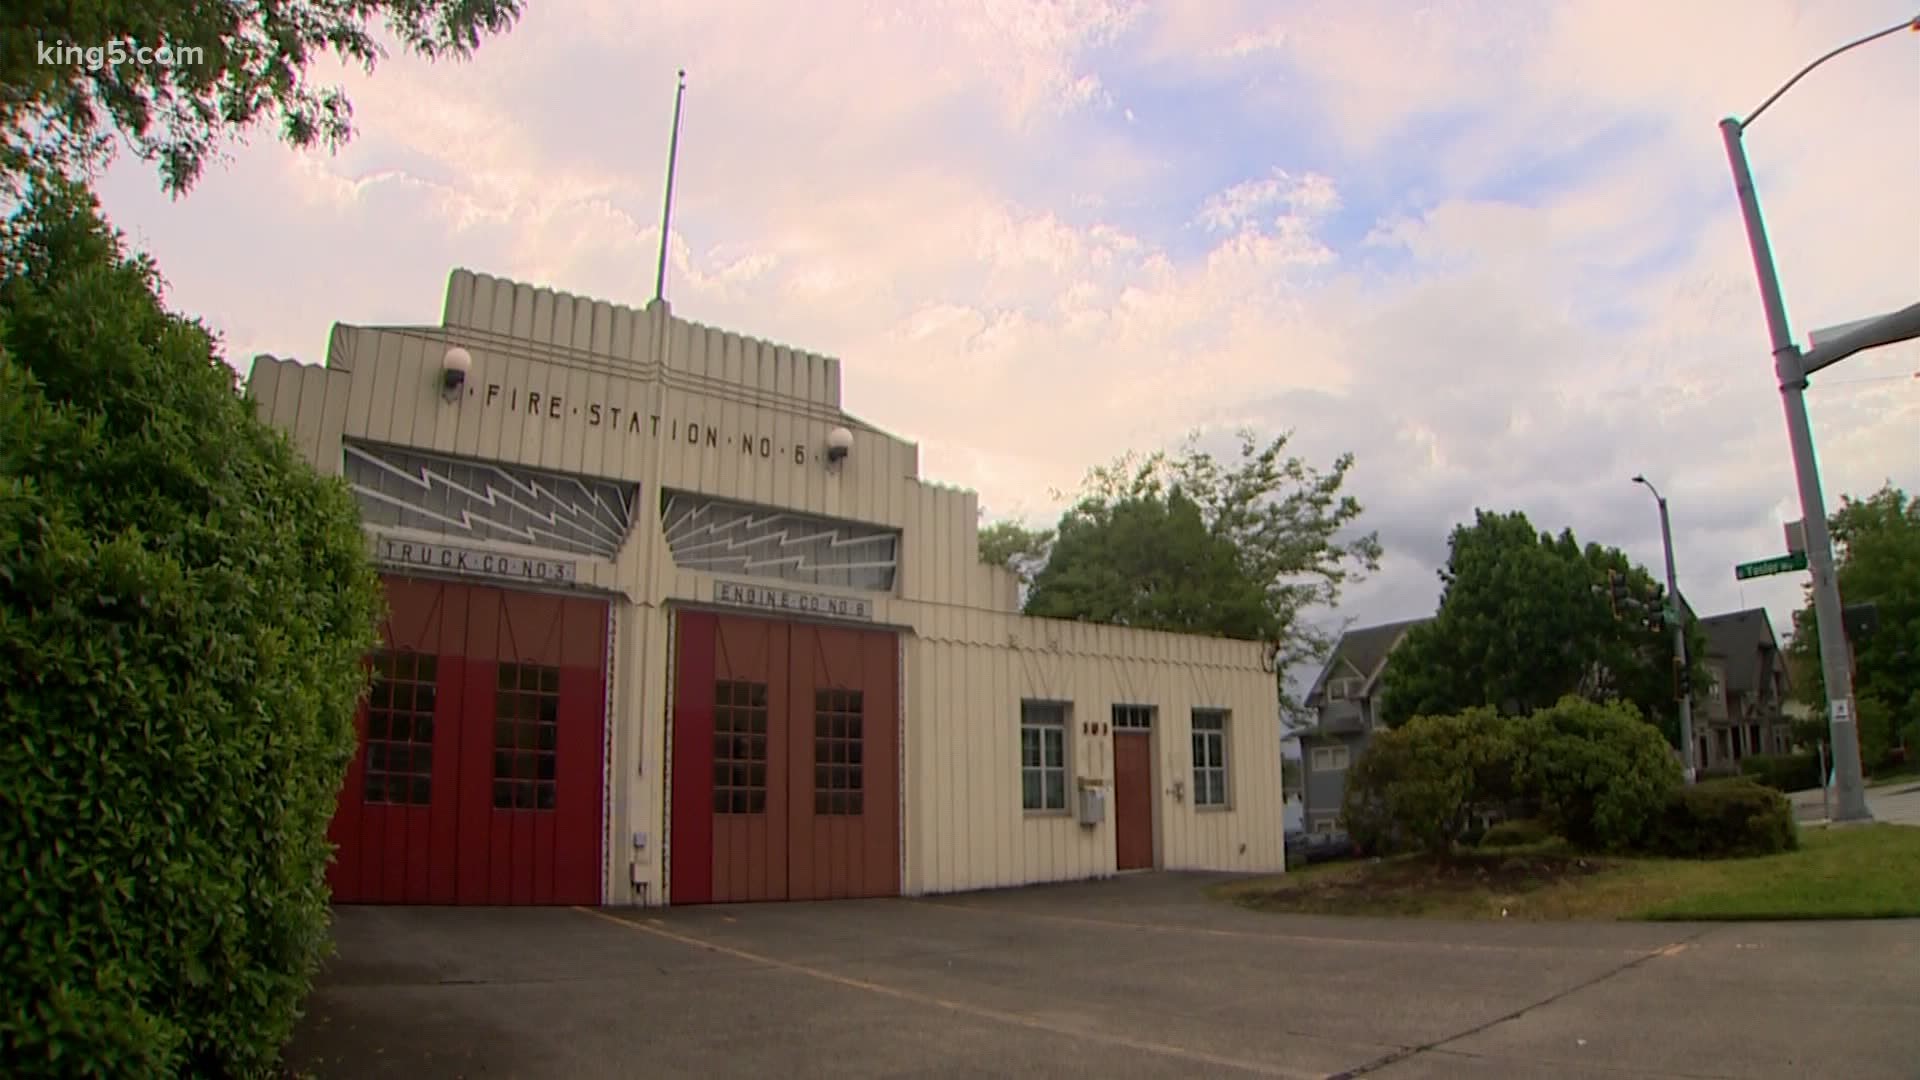 In response to protests and community demands, the City of Seattle will transfer Fire Station 6 in the Central District to the community.